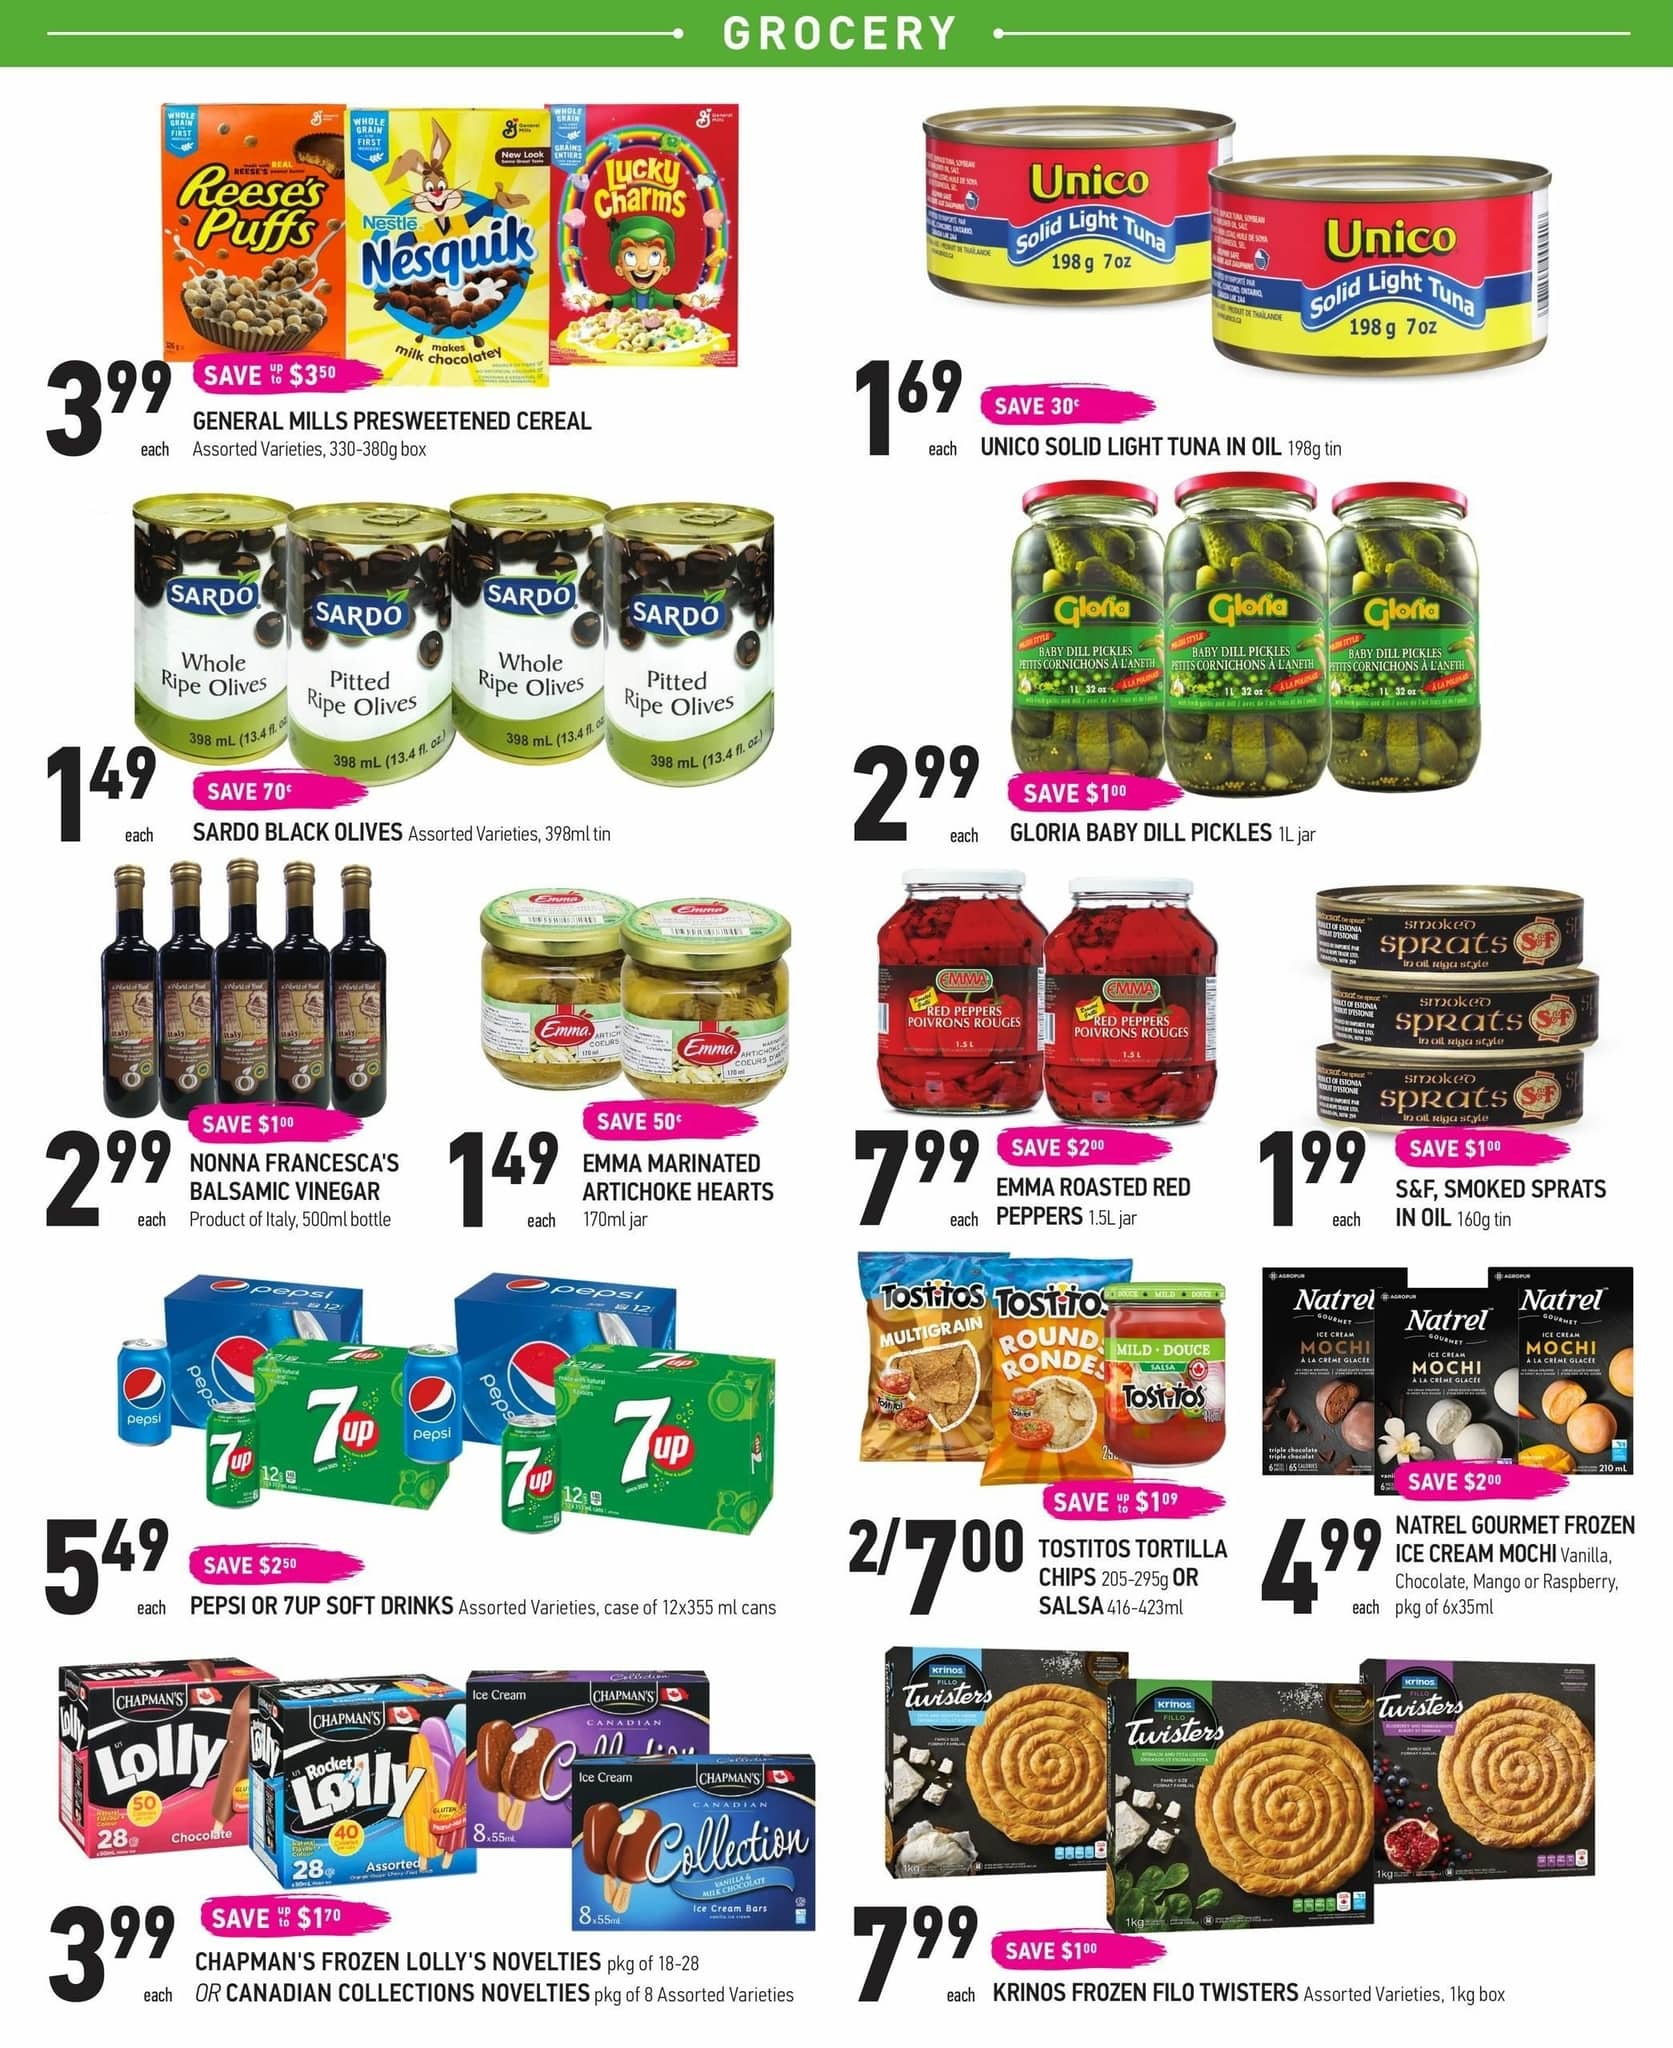 Coppa's Fresh Market - Weekly Flyer Specials - Page 3